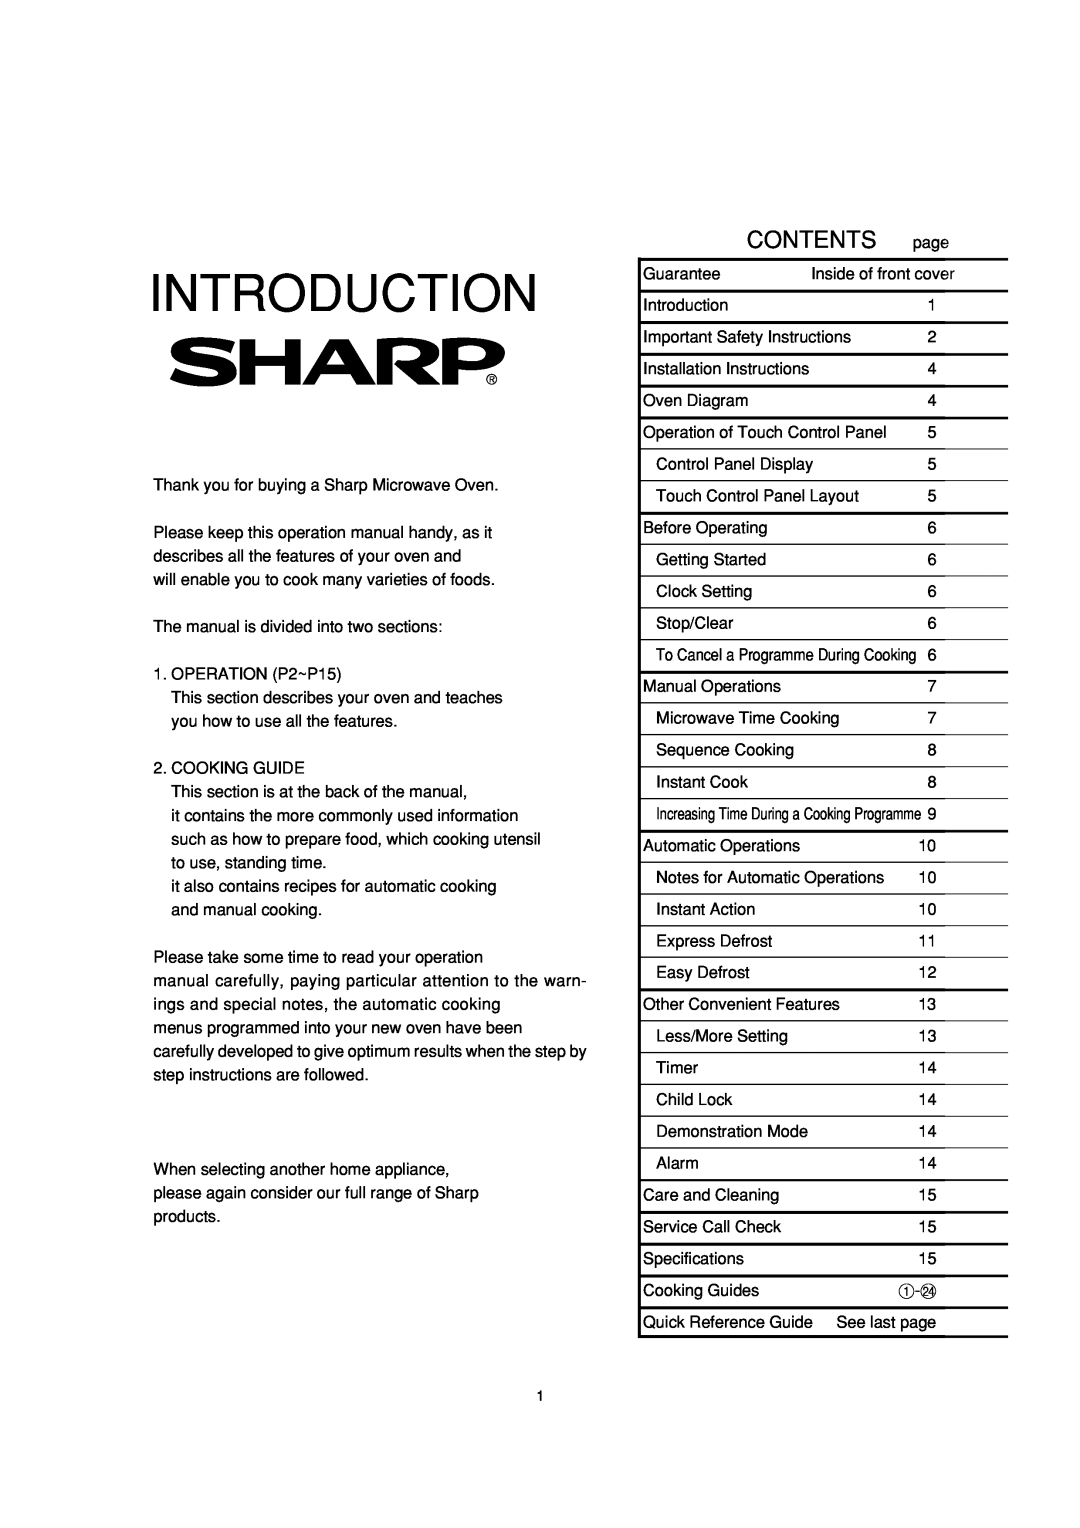 Sharp R-390H(S) operation manual Introduction, Contents 